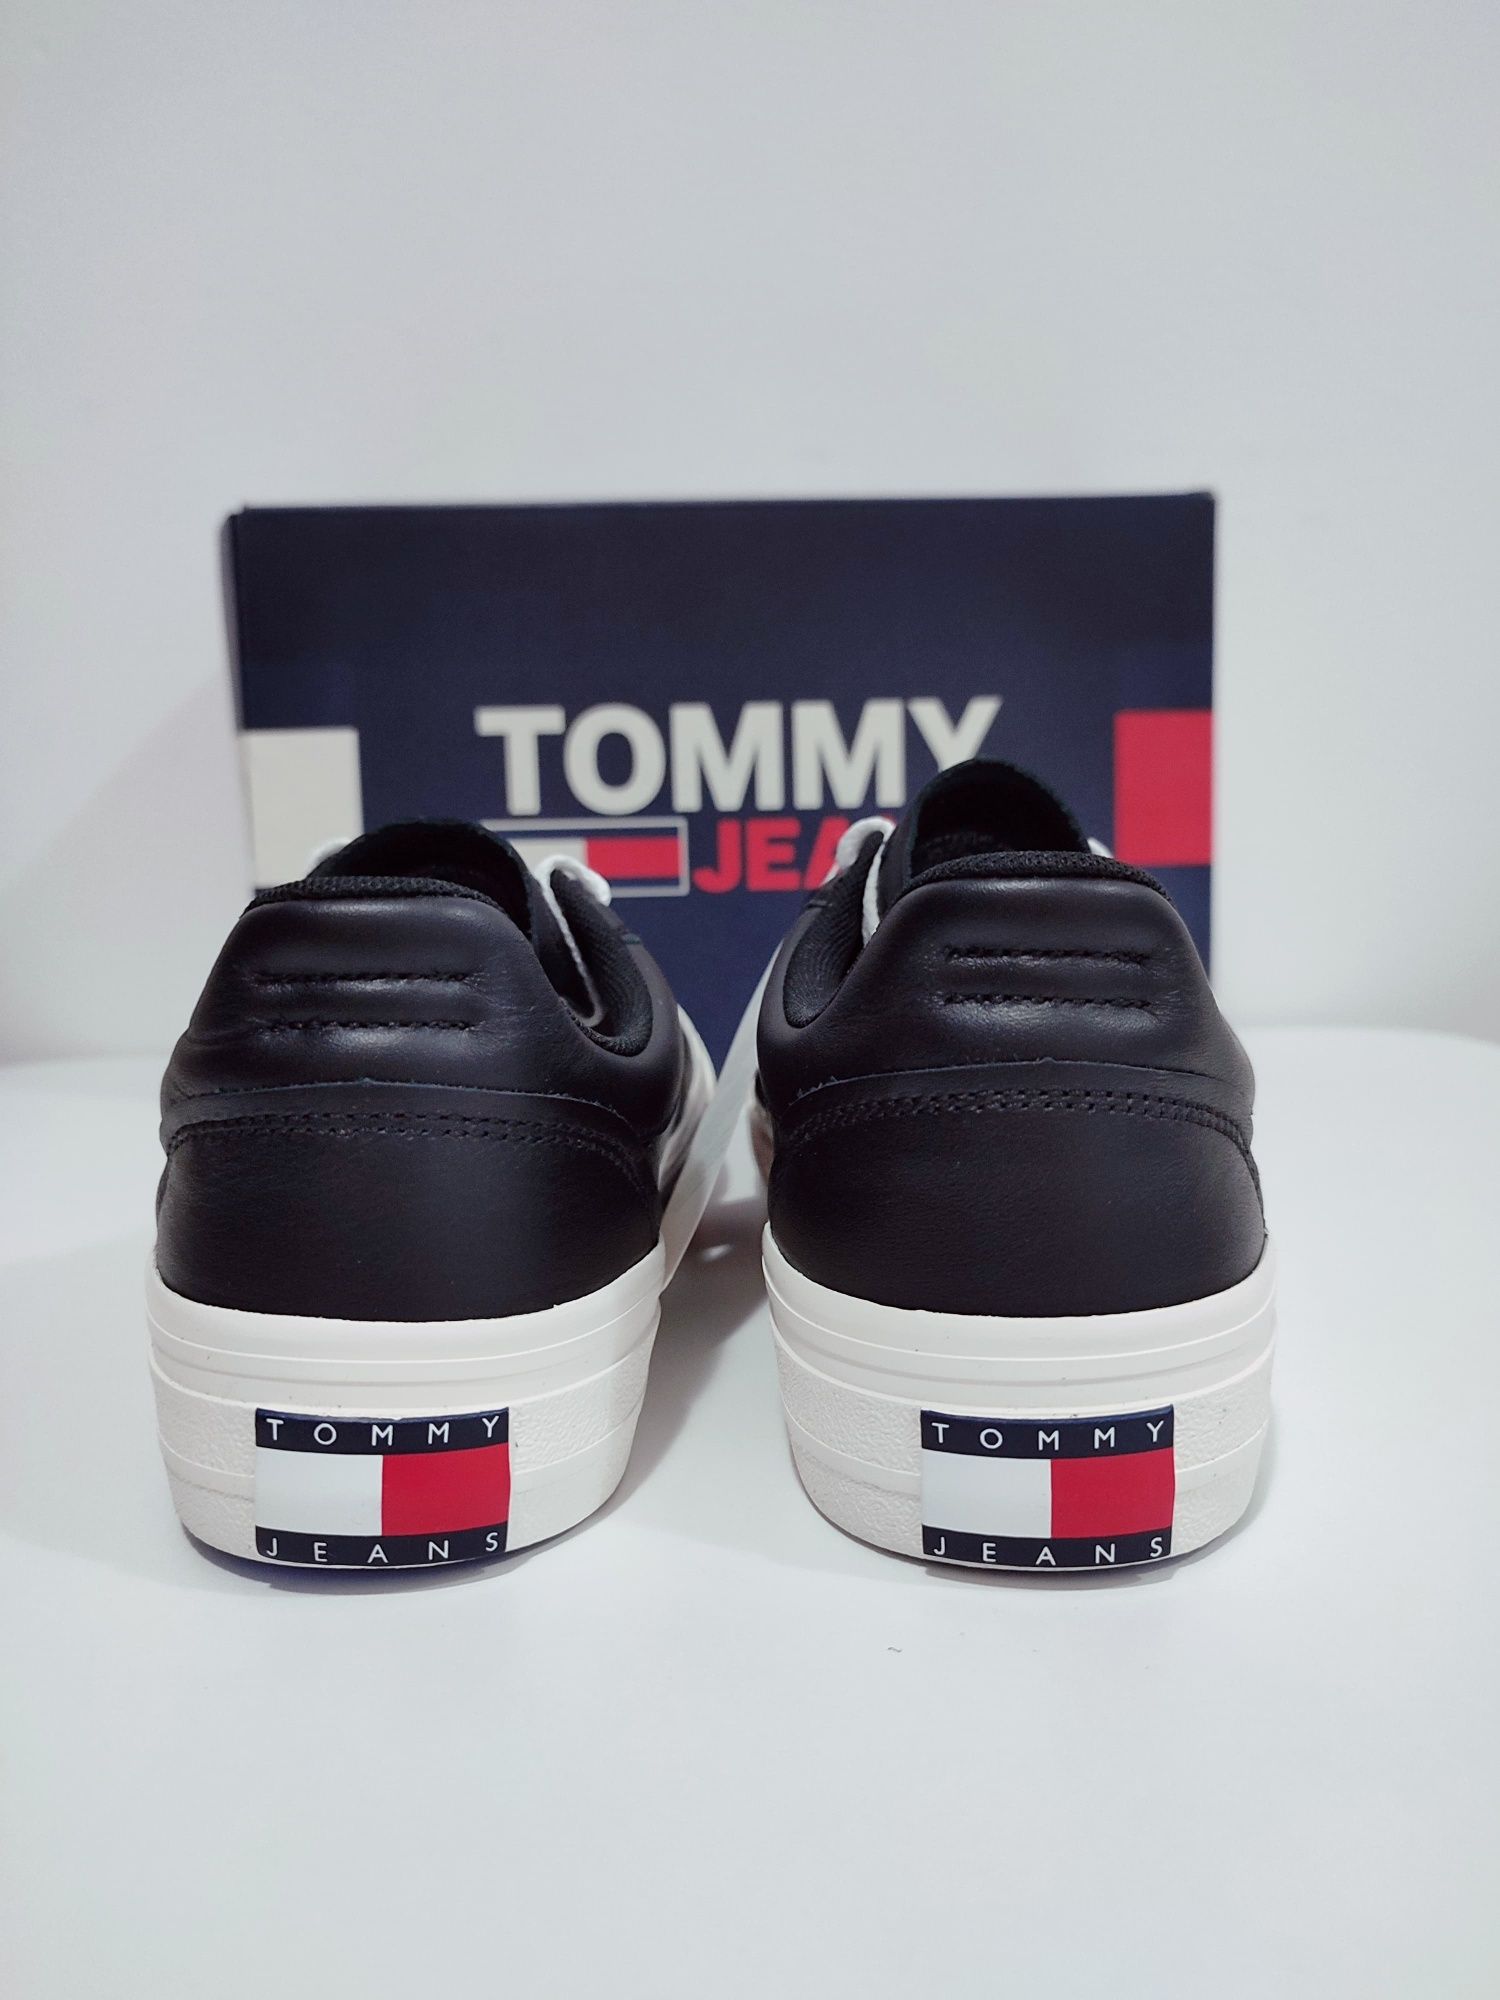 Tommy Hilfiger Leather Sneakers